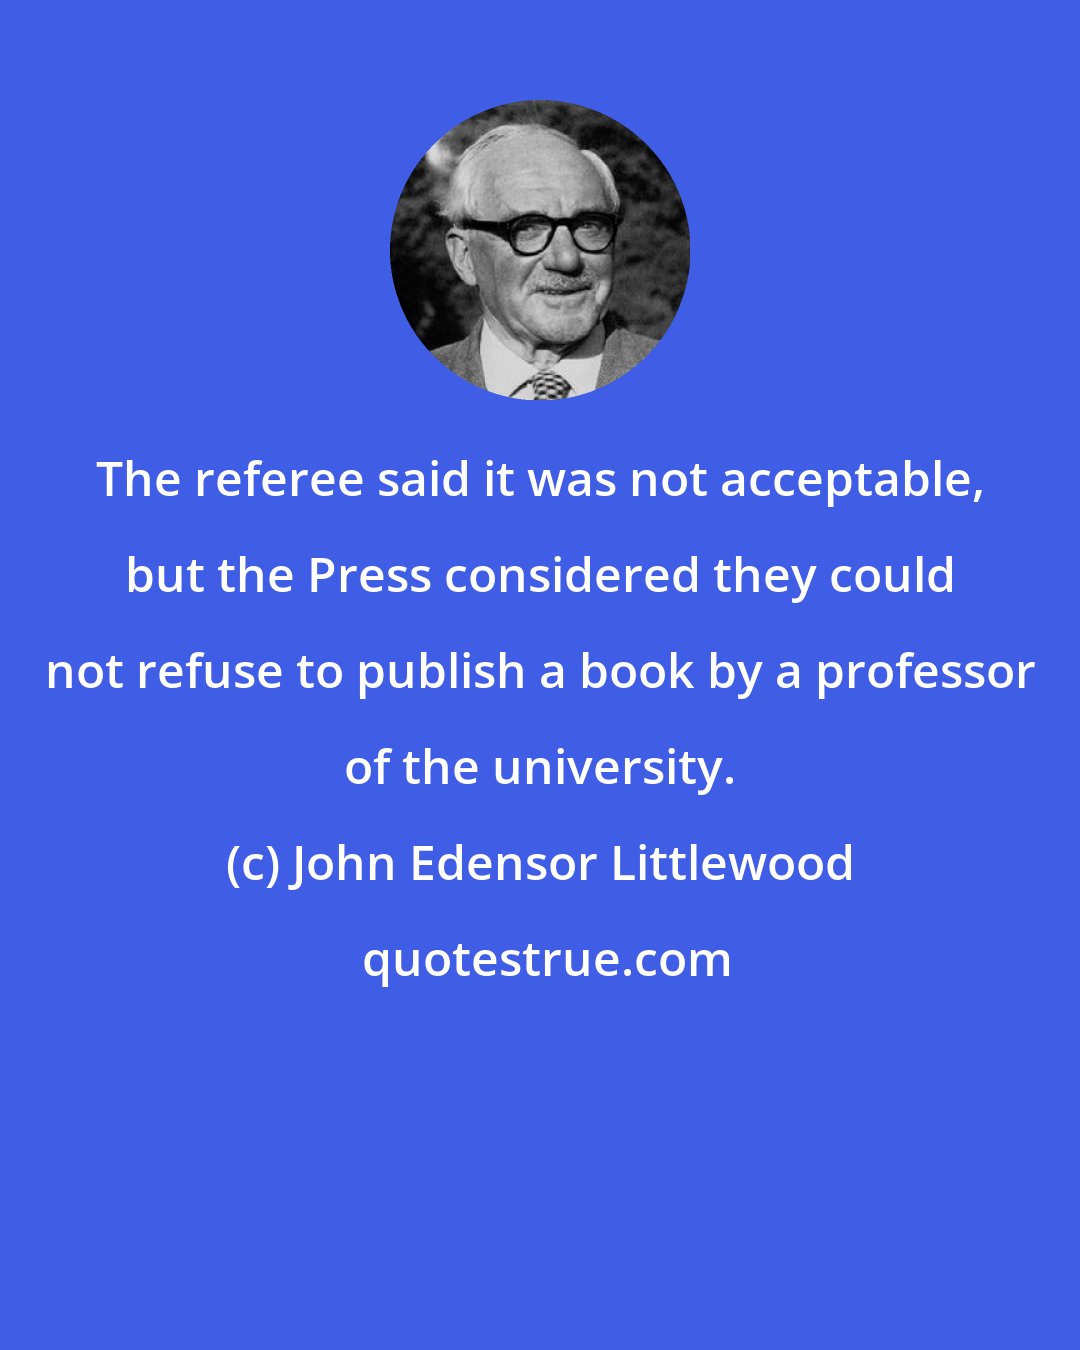 John Edensor Littlewood: The referee said it was not acceptable, but the Press considered they could not refuse to publish a book by a professor of the university.